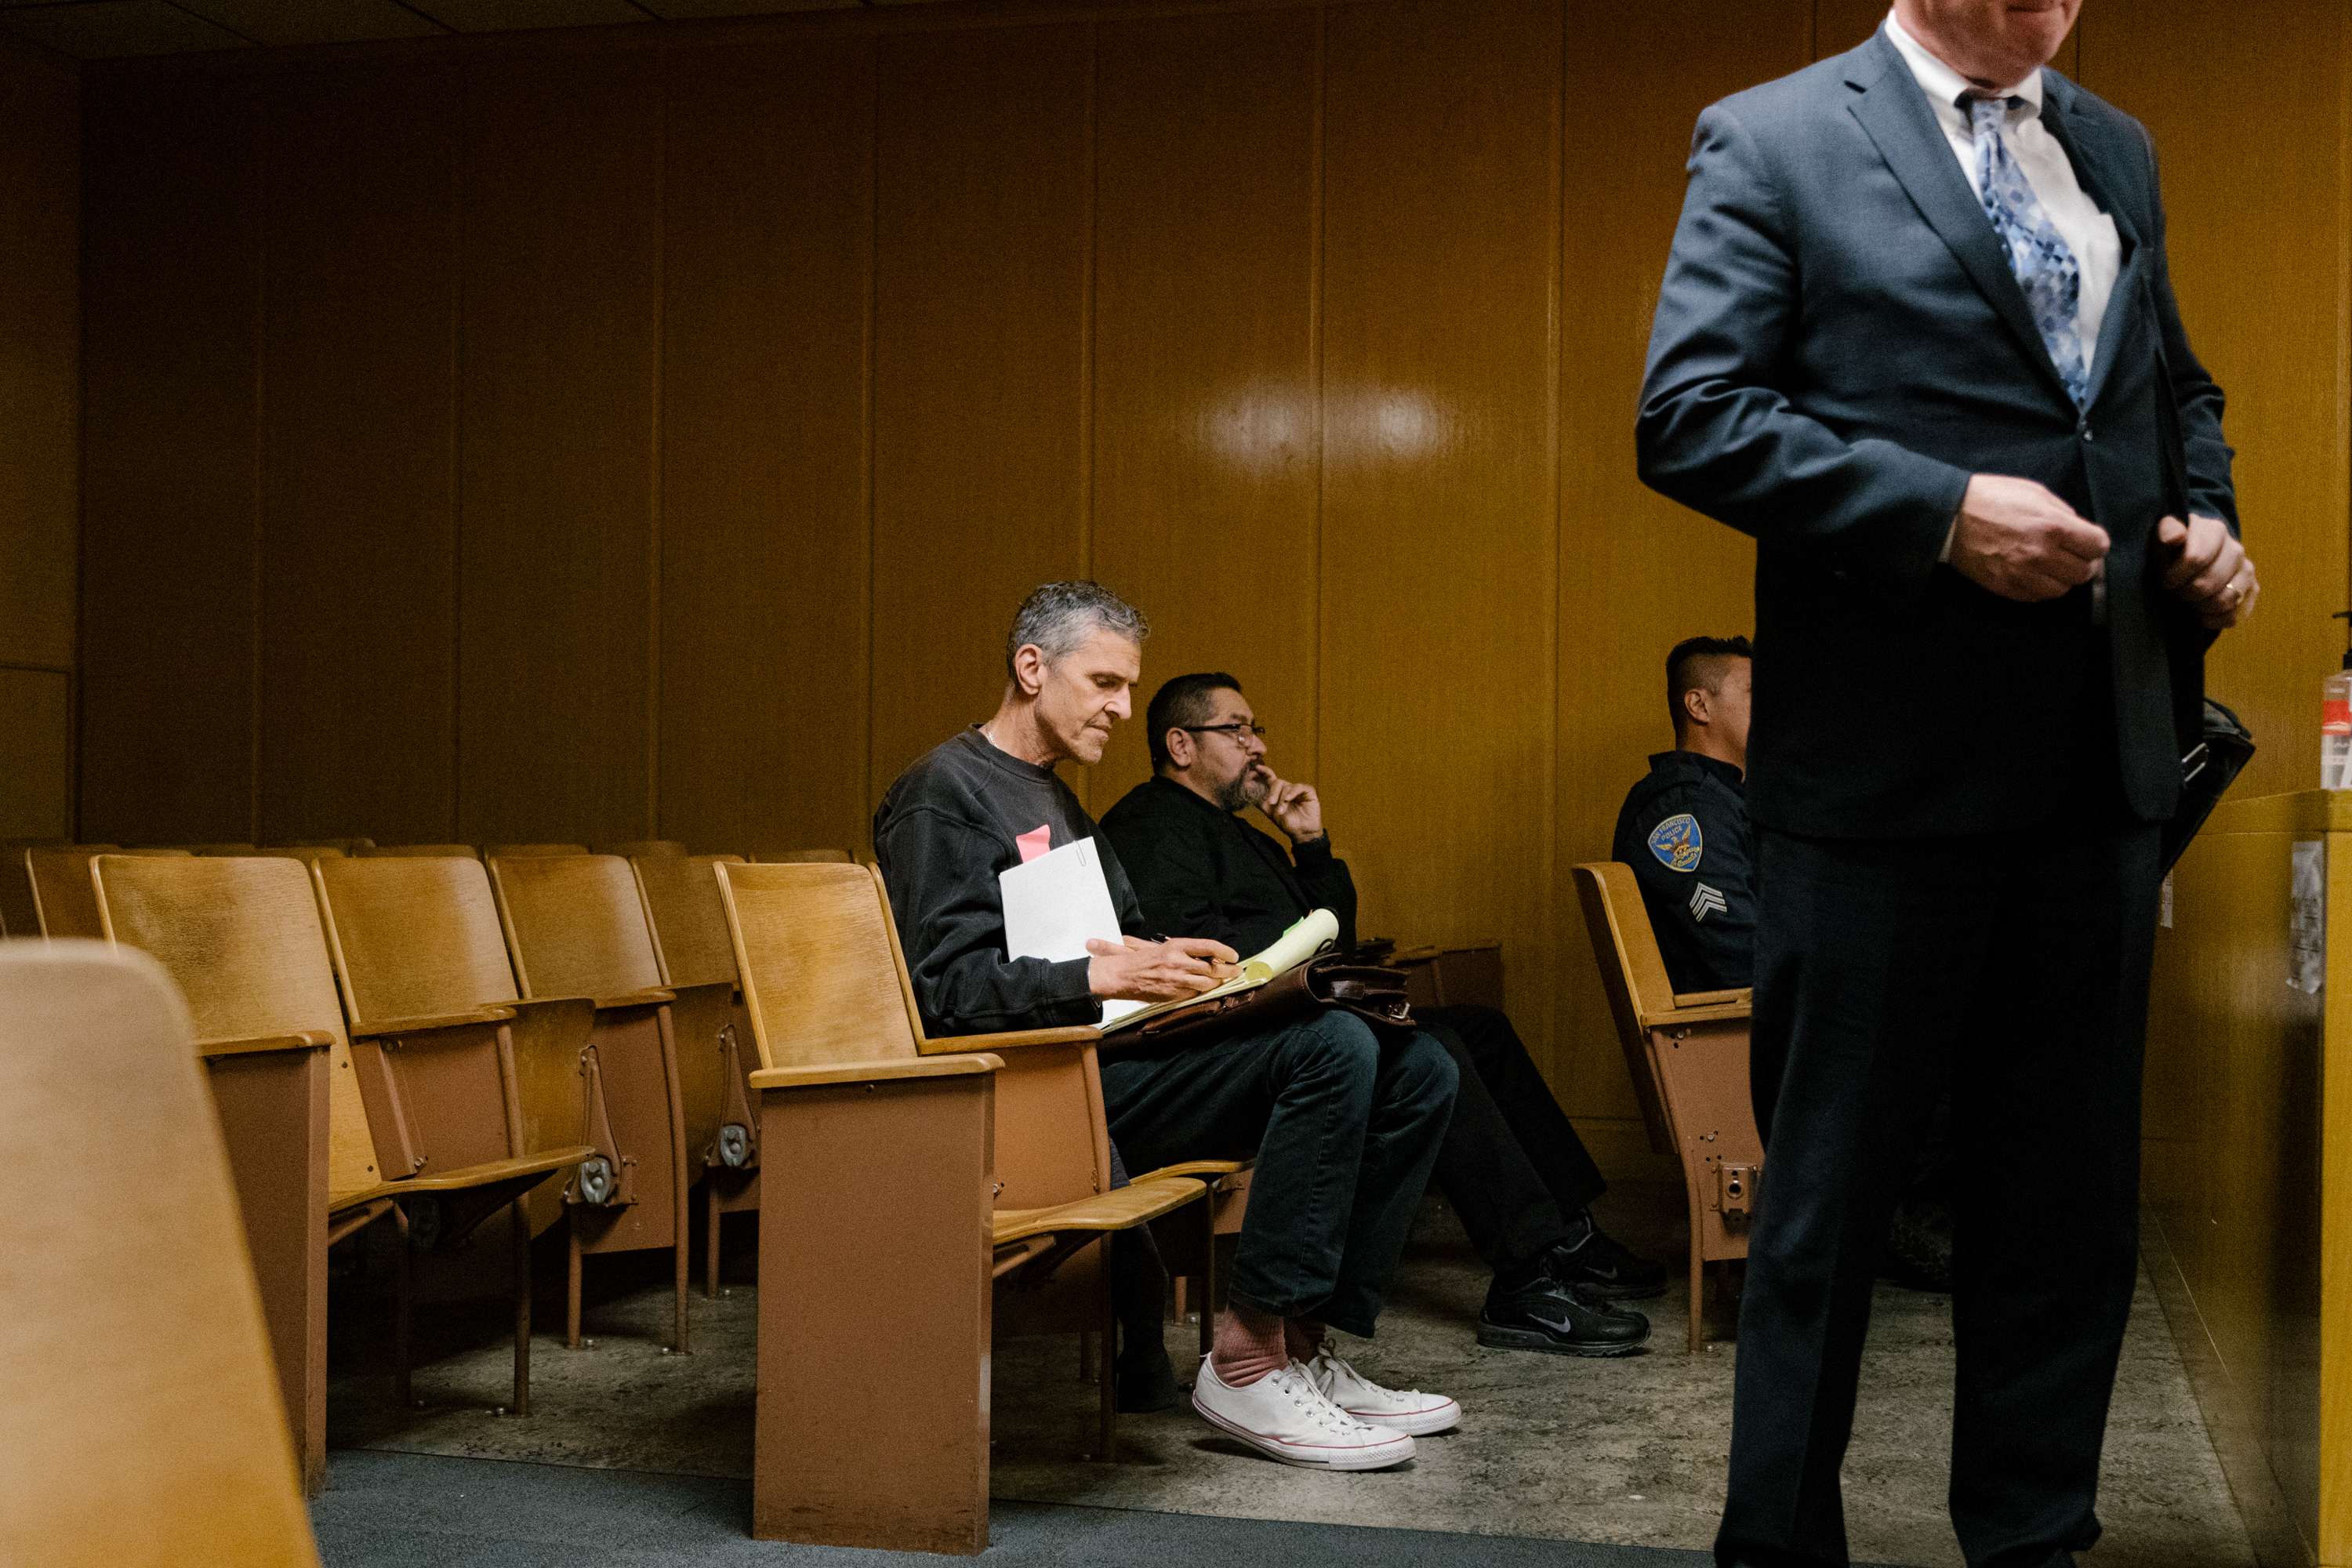 A man sits down in wooden seat in a courtroom setting looking at paperwork.